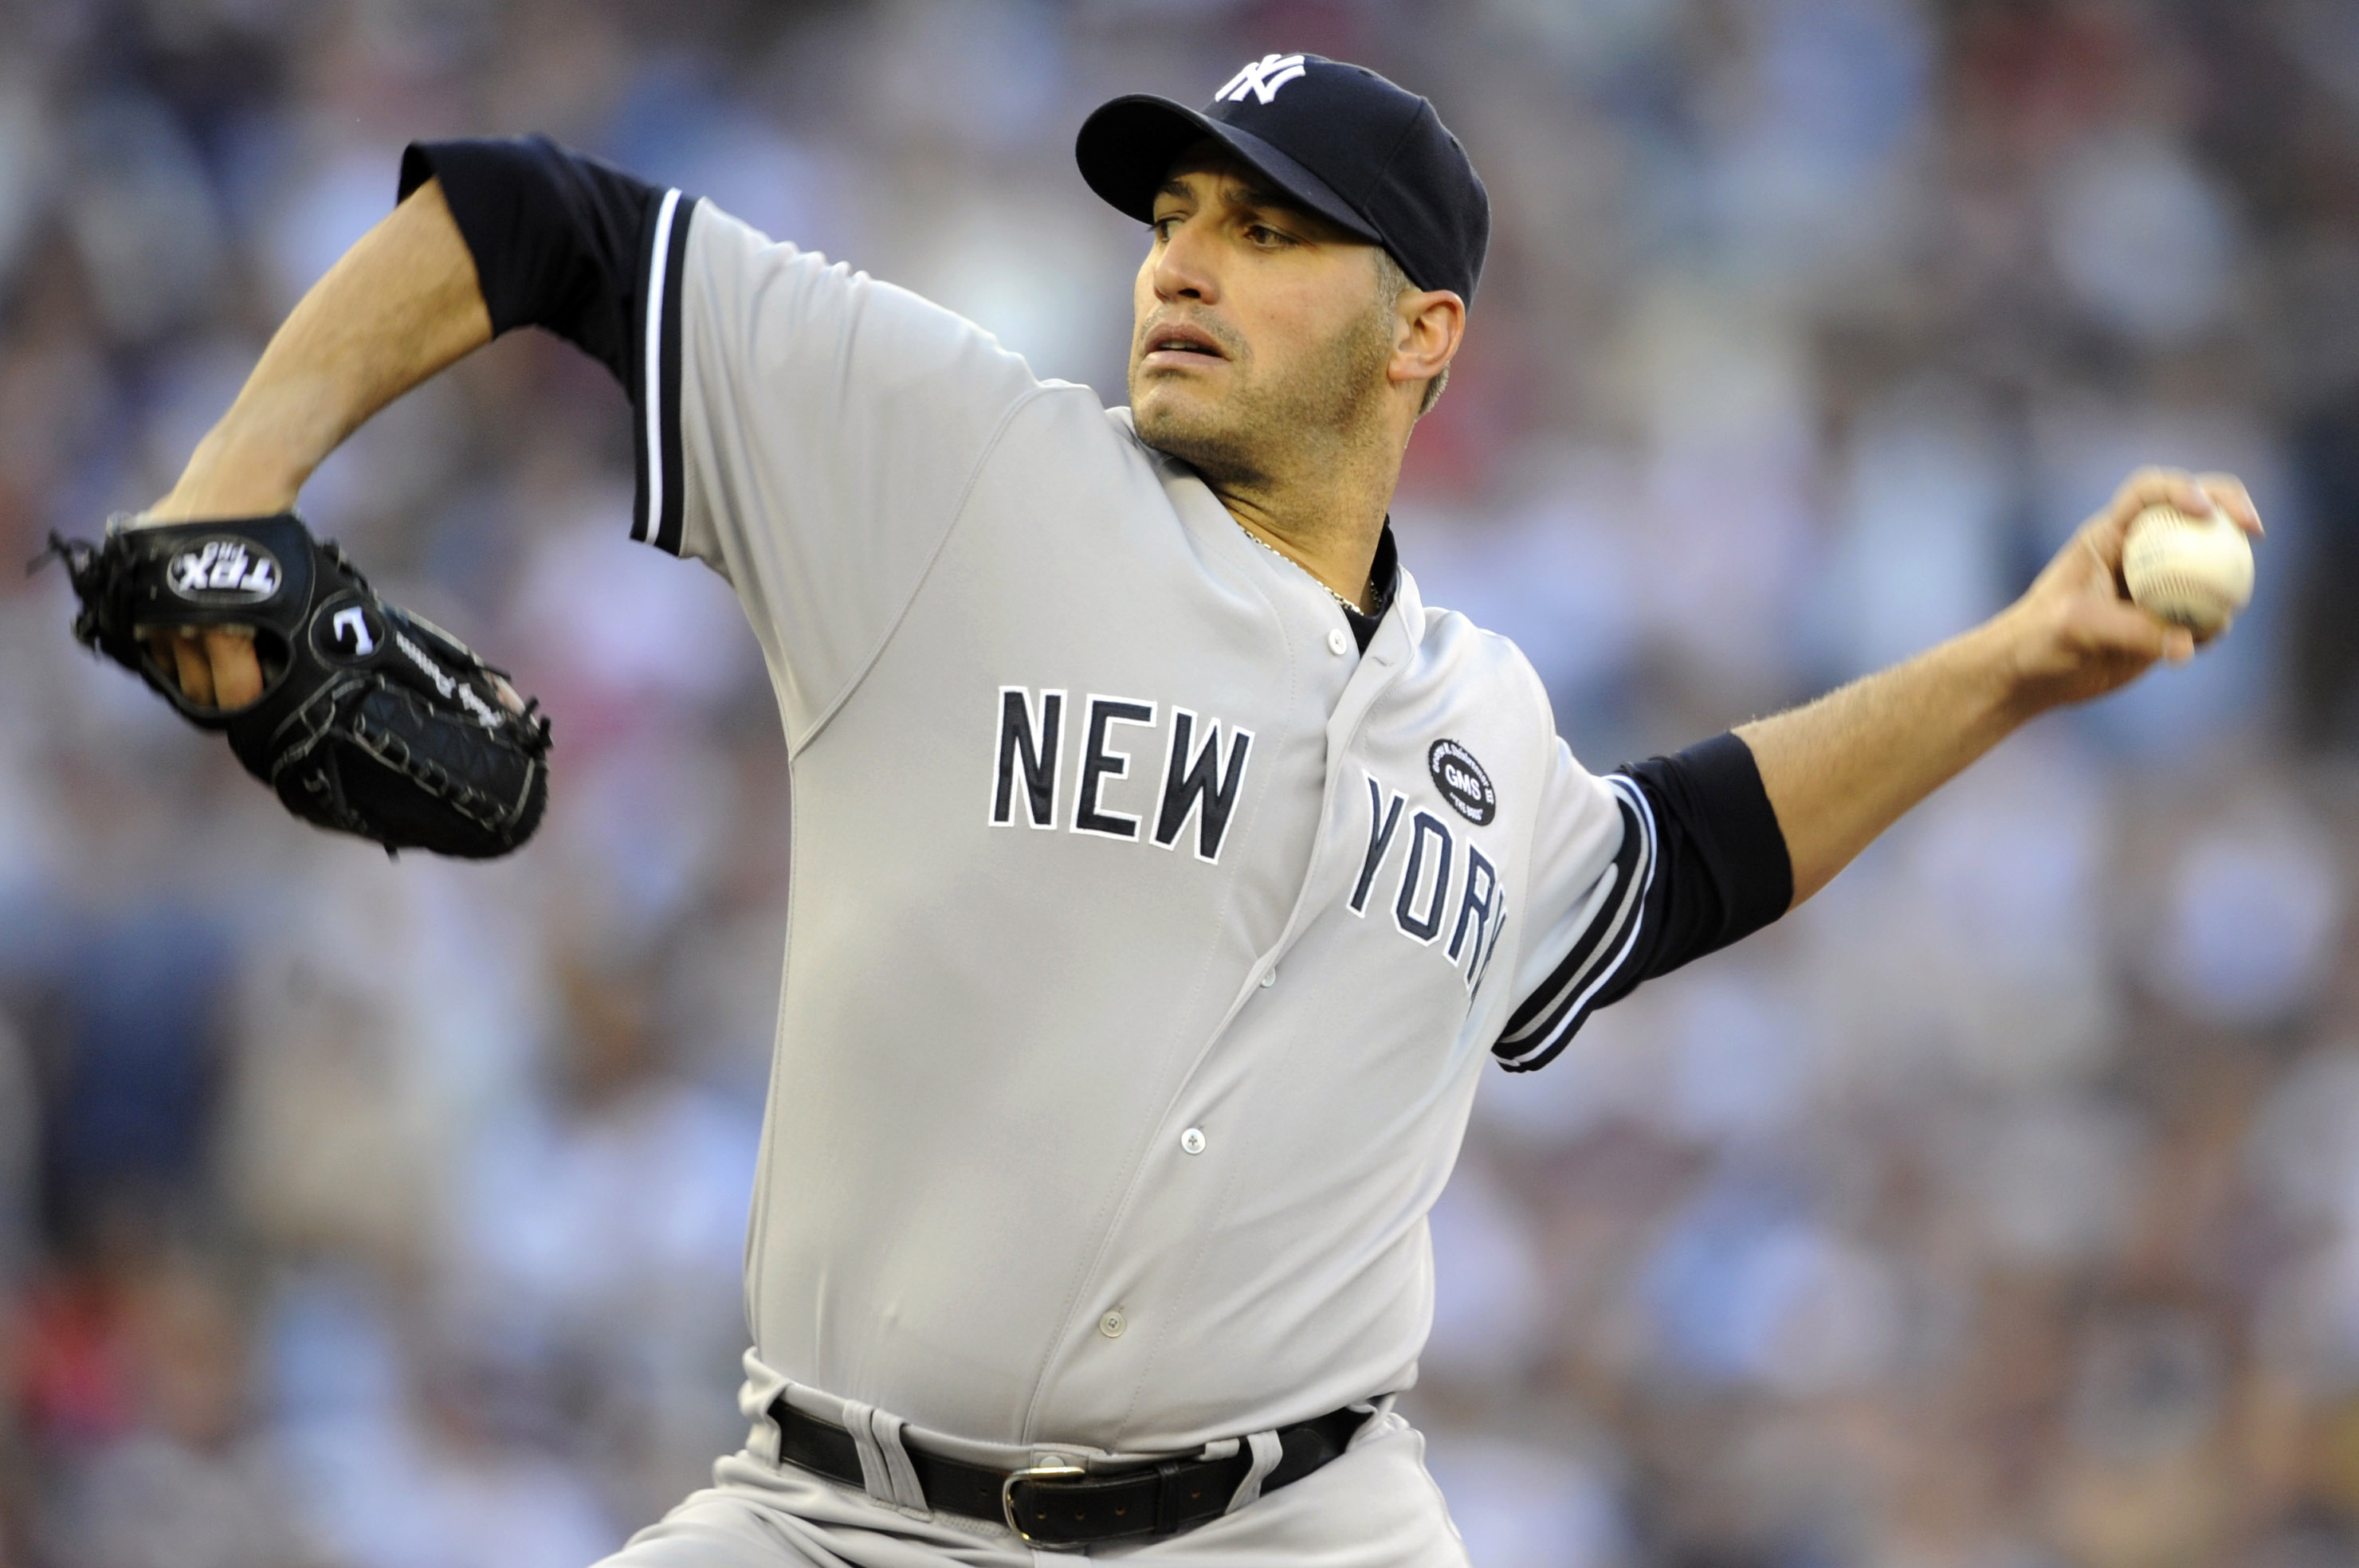 MINNEAPOLIS, MN - OCTOBER 7: Andy Pettitte #46 of the New York Yankees pitches during game two of the ALDS game against the Minnesota Twins on October 7, 2010 at Target Field in Minneapolis, Minnesota.  (Photo by Hannah Foslien/Getty Images)